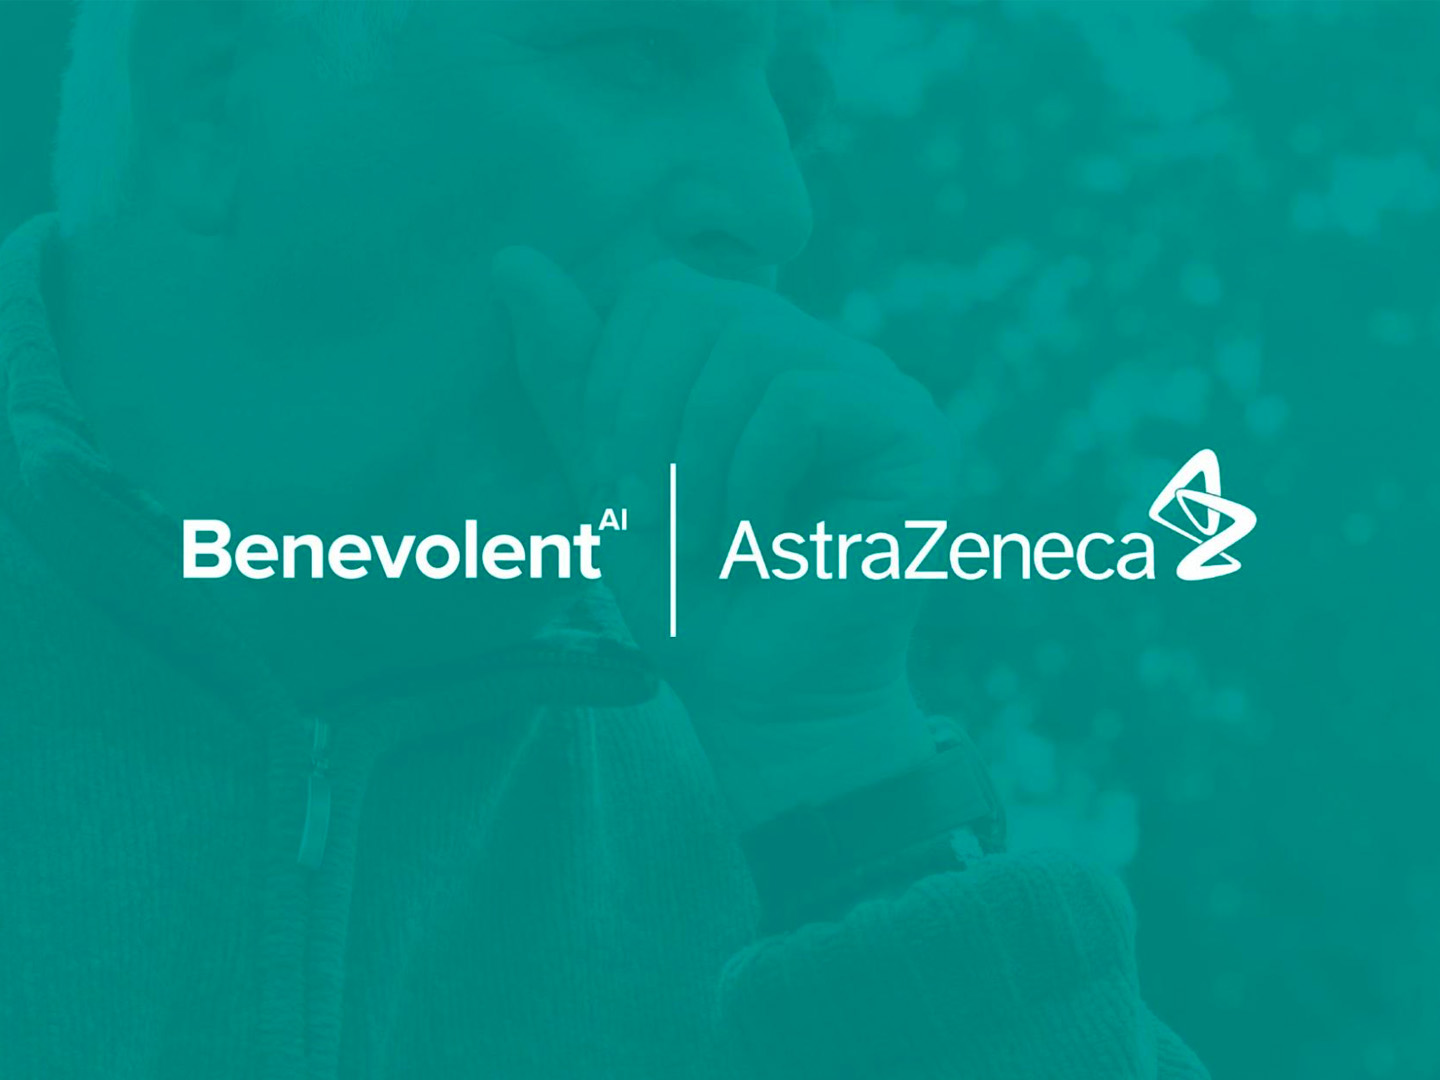 BenevolentAI_achieves_third_milestone_in_its_AI-enabled_drug_discovery_collaboration_with_AstraZeneca.jpg